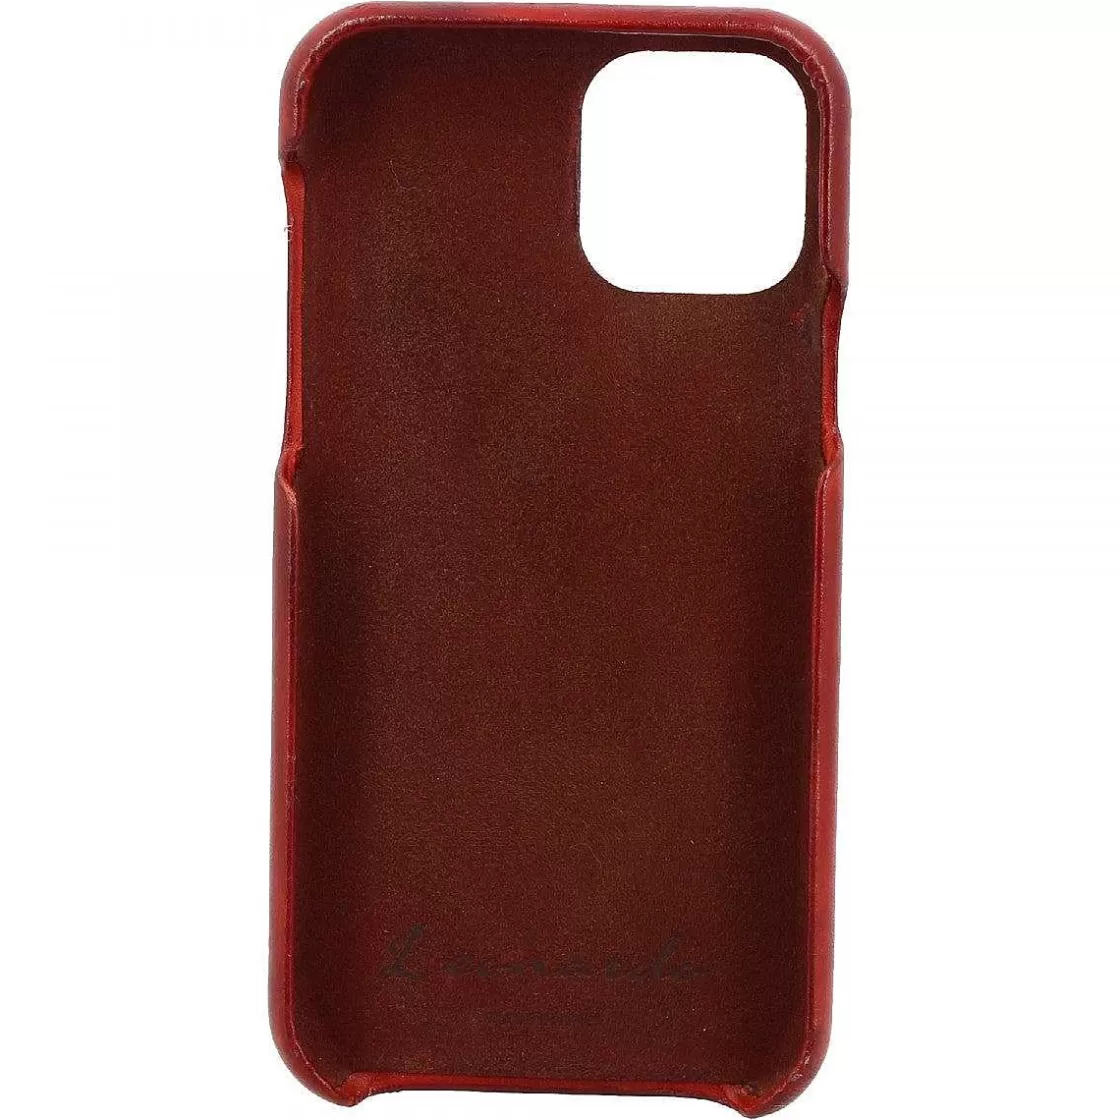 Leonardo Iphone Cover In Hand-Buffered Red Leather Cheap